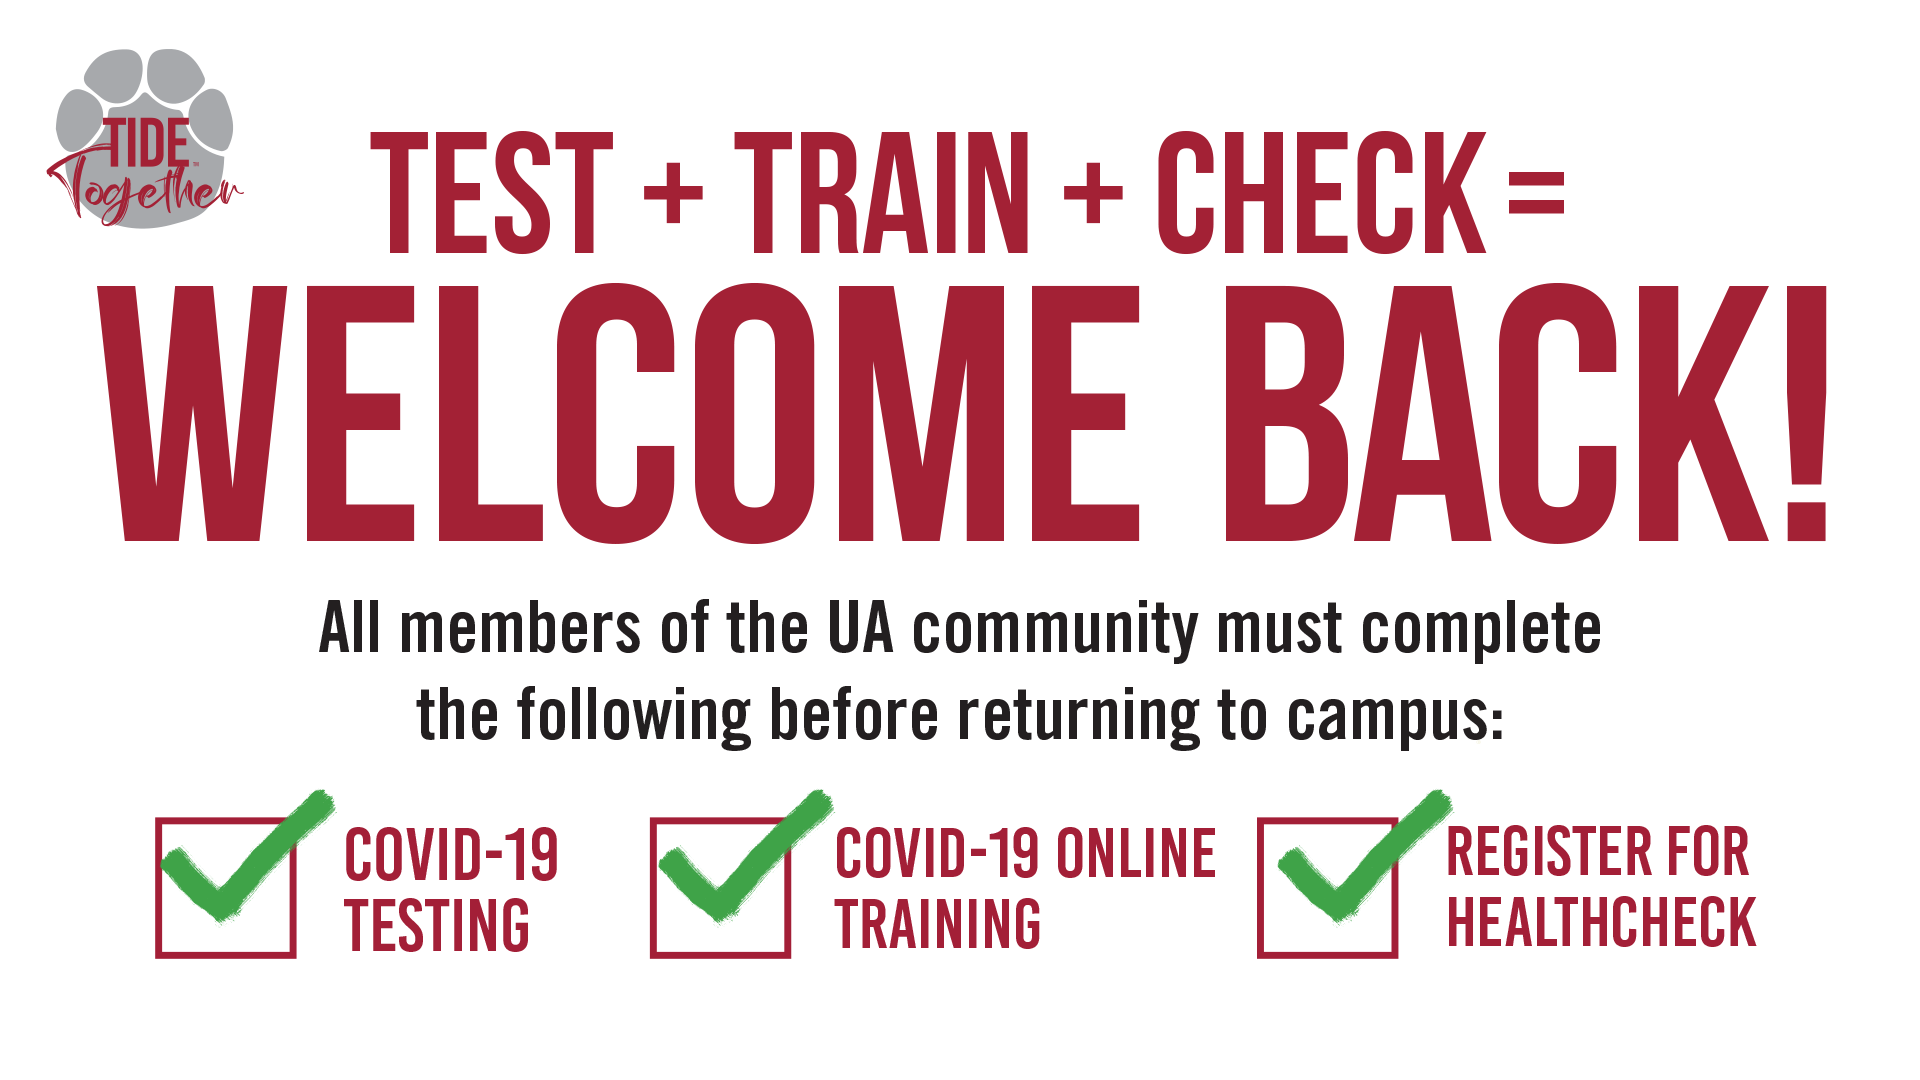 TEST + TRAIN + CHECK = WELCOME BACK